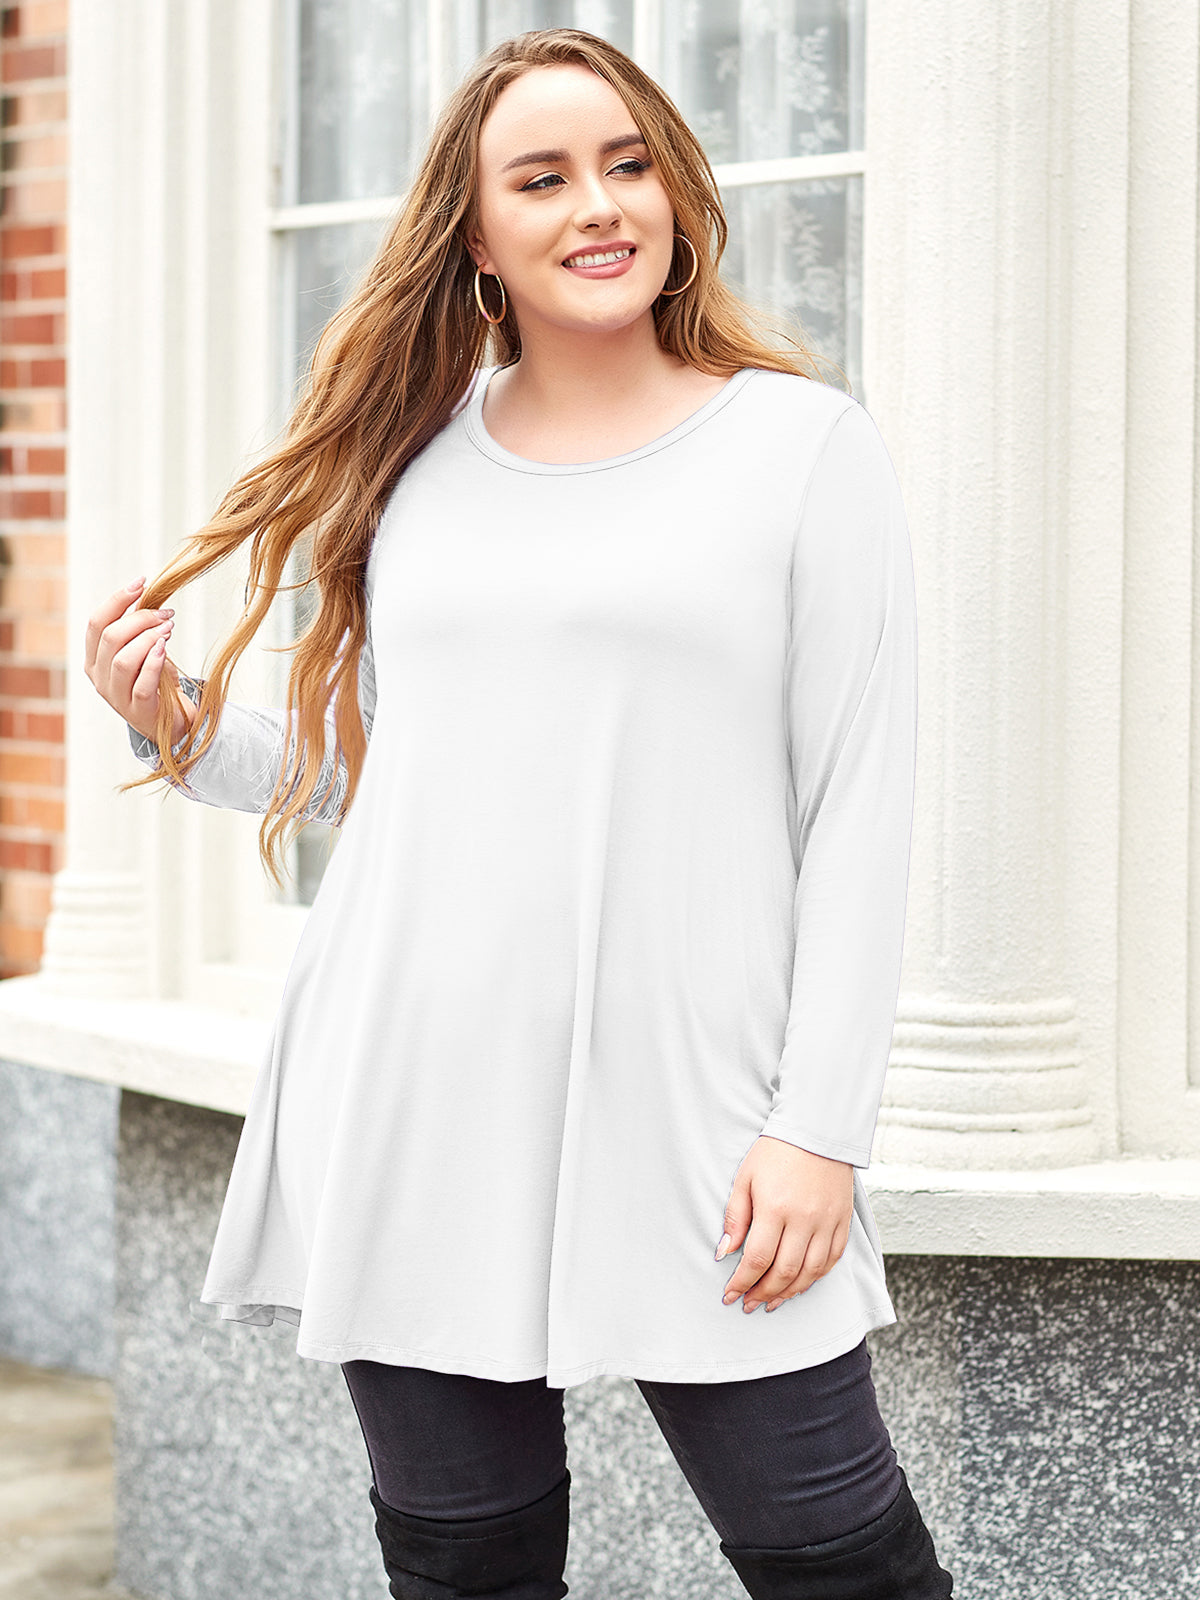 LARACE Plus Size Tunic Tops for Women Long Sleeve Swing Shirt Loose Fit  Flowy Clothing for Leggings 8053 - White / 1XL